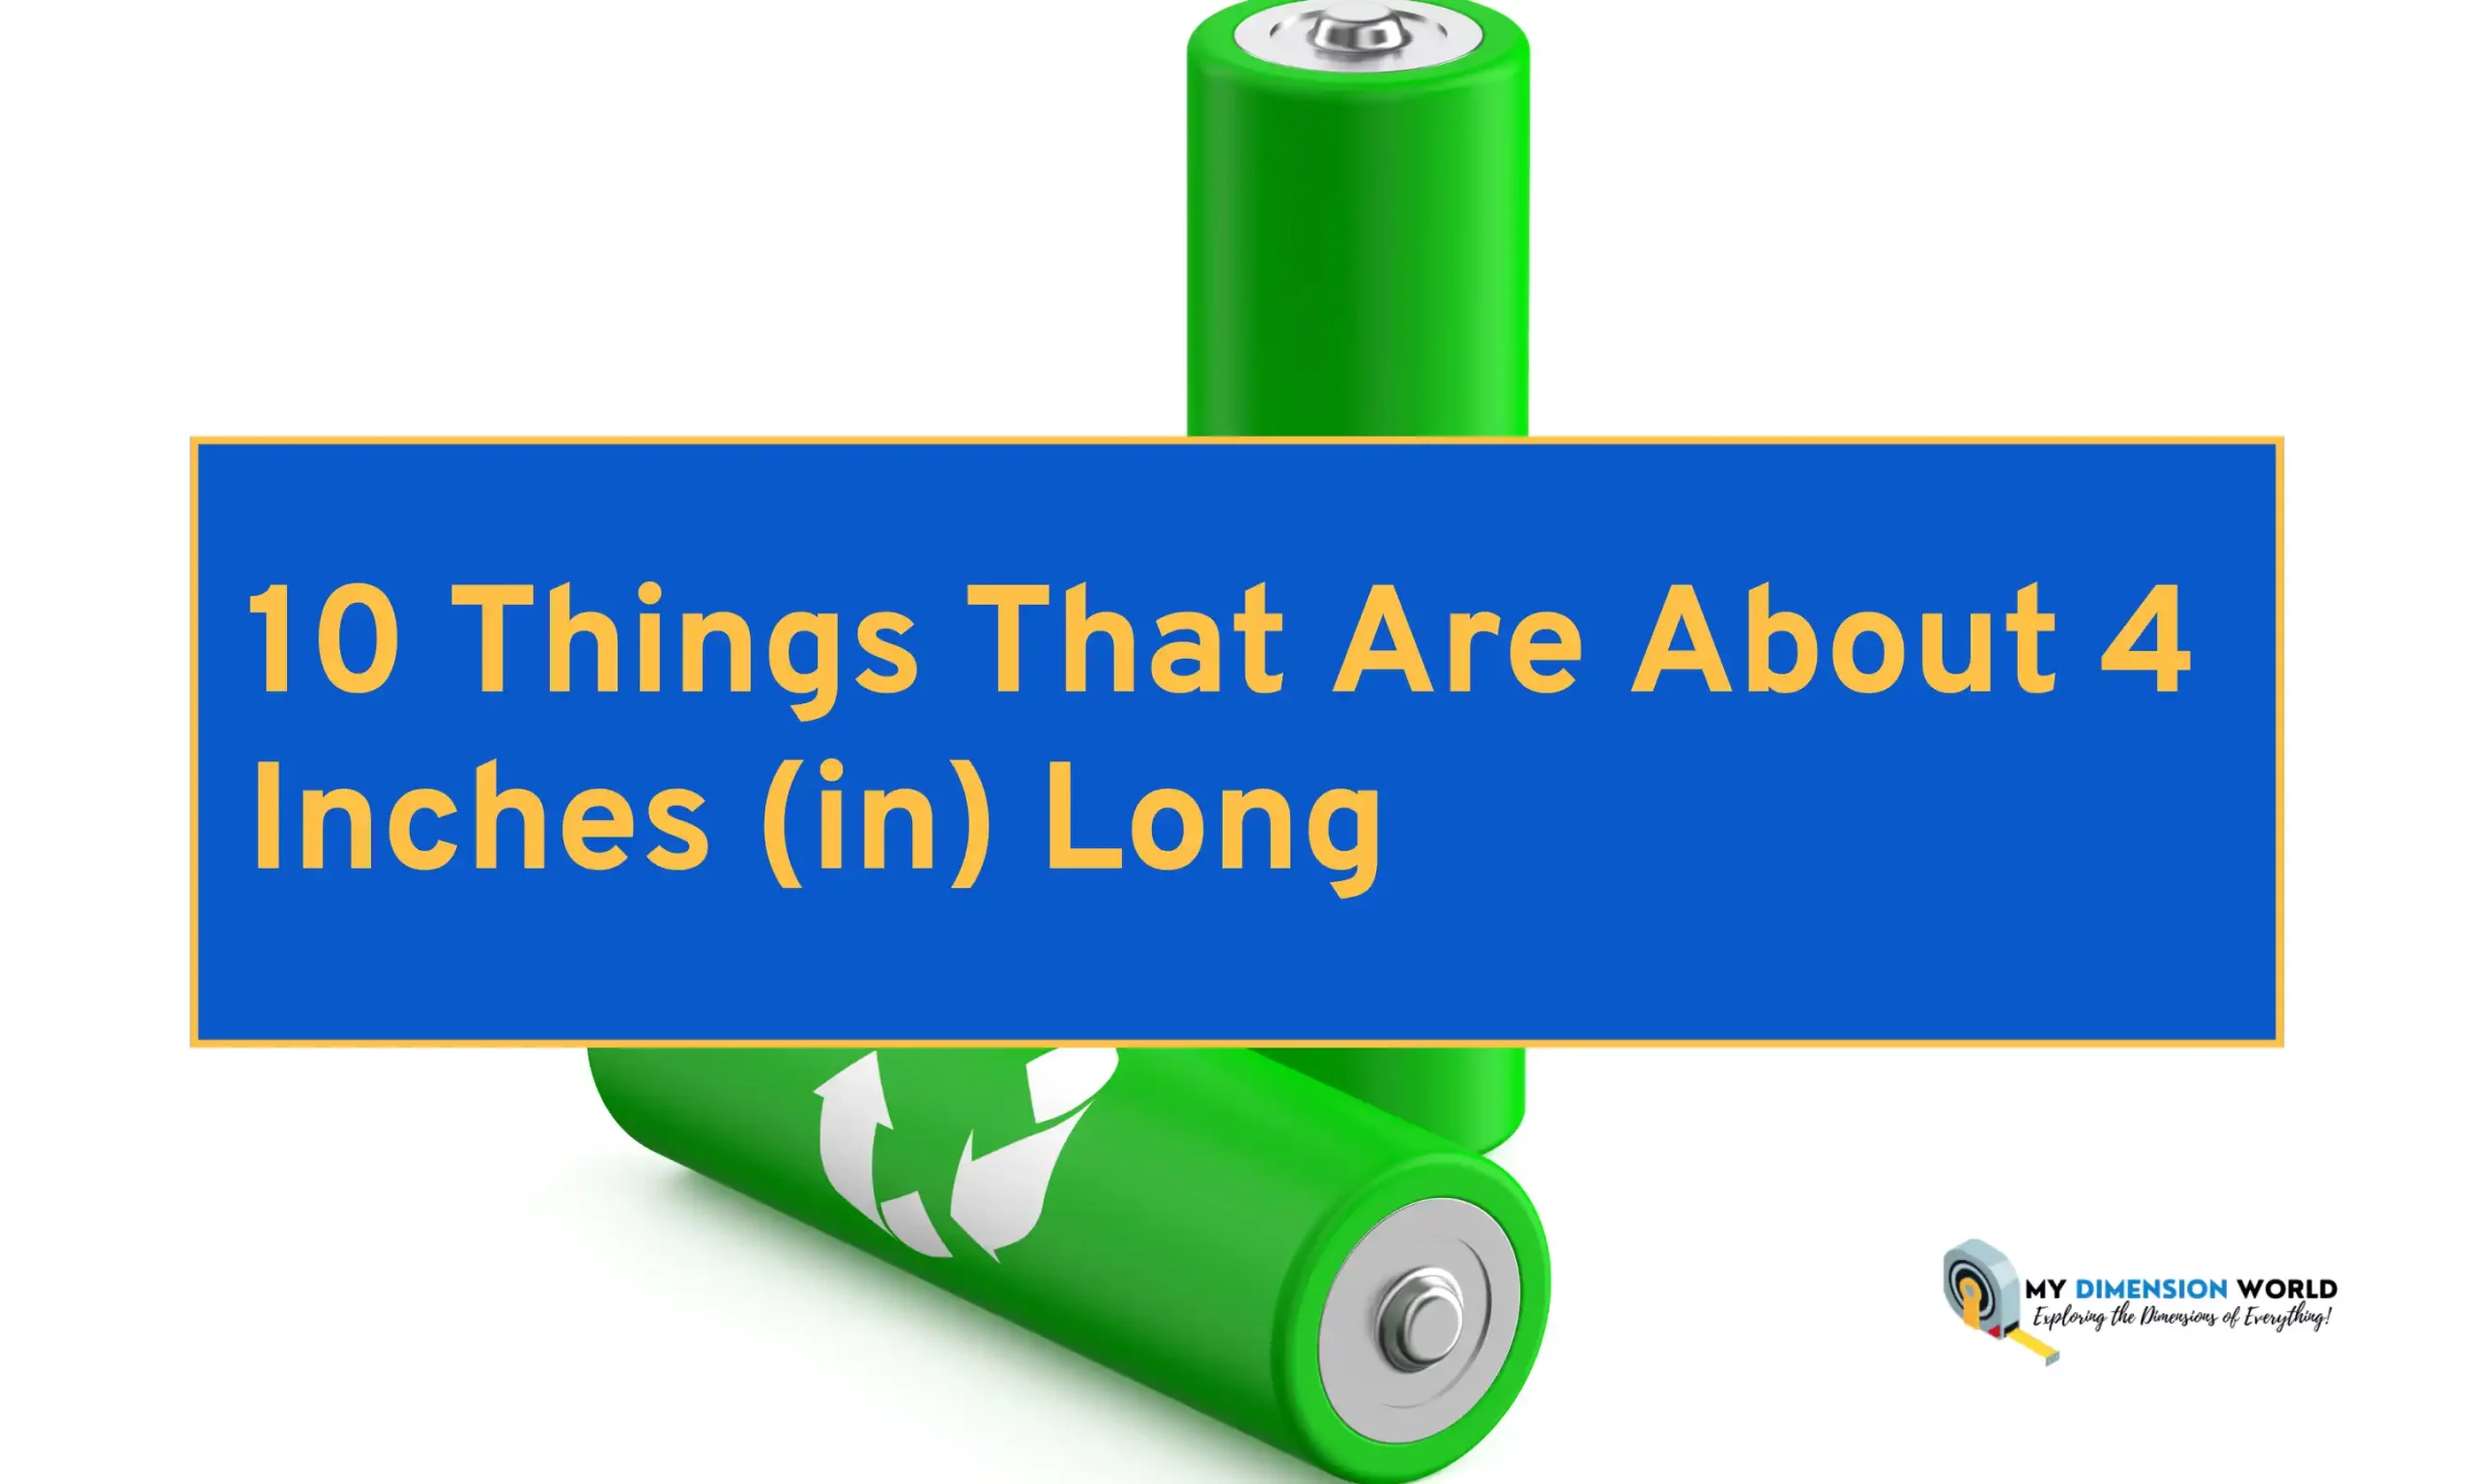 10 Things That Are About 4 Inches (in) Long